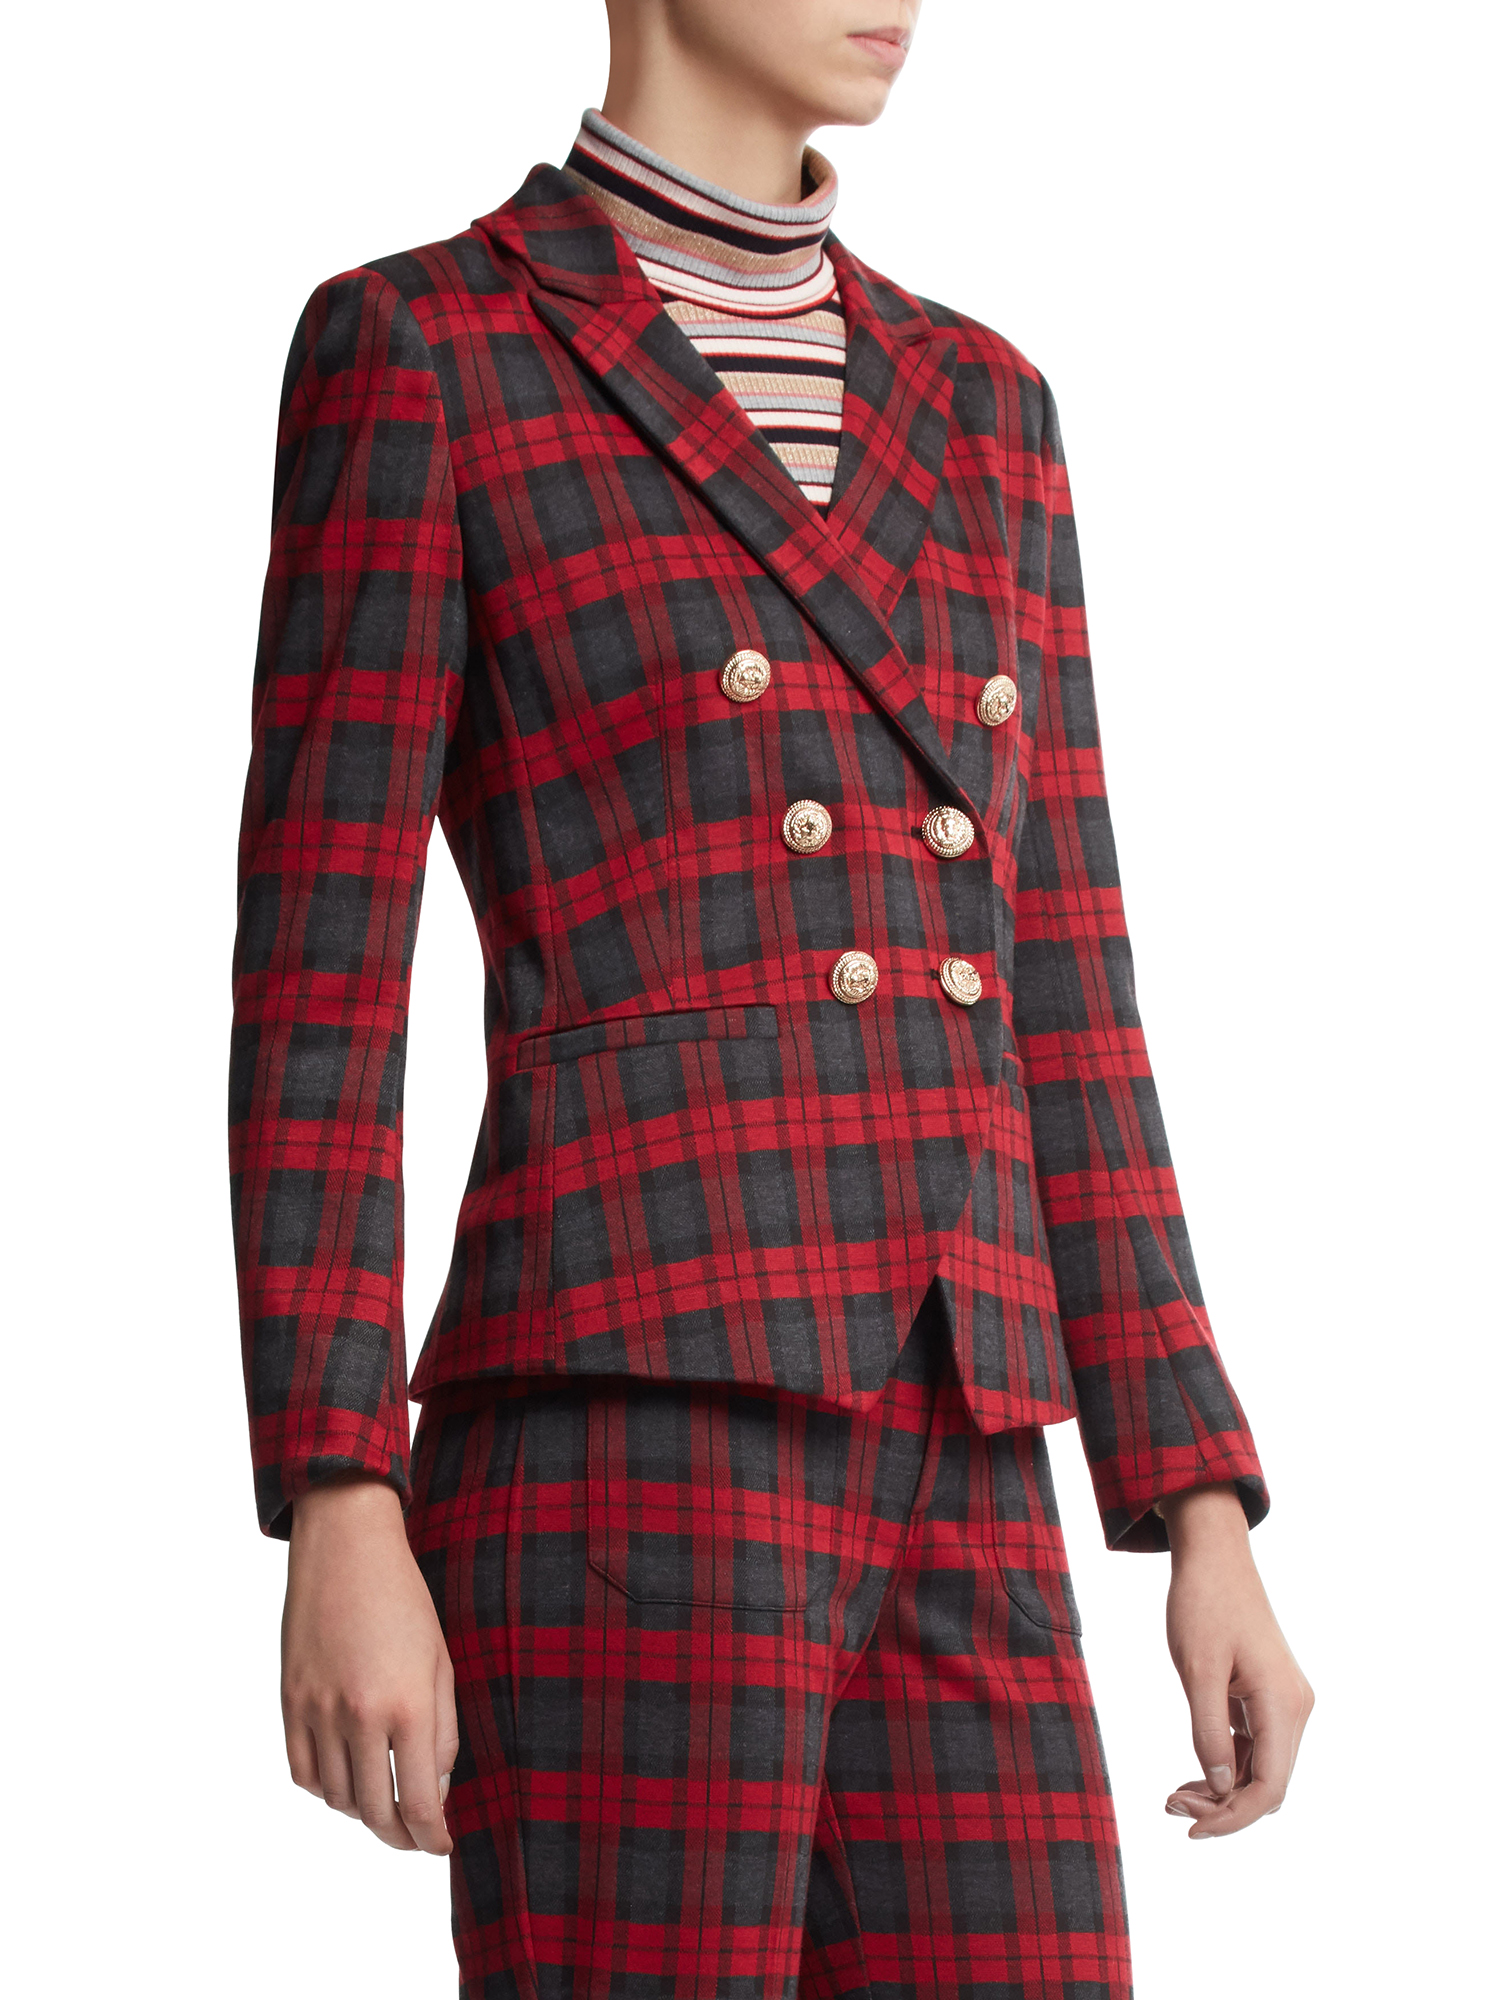 Scoop Plaid Double Breasted Blazer Women's - image 4 of 7